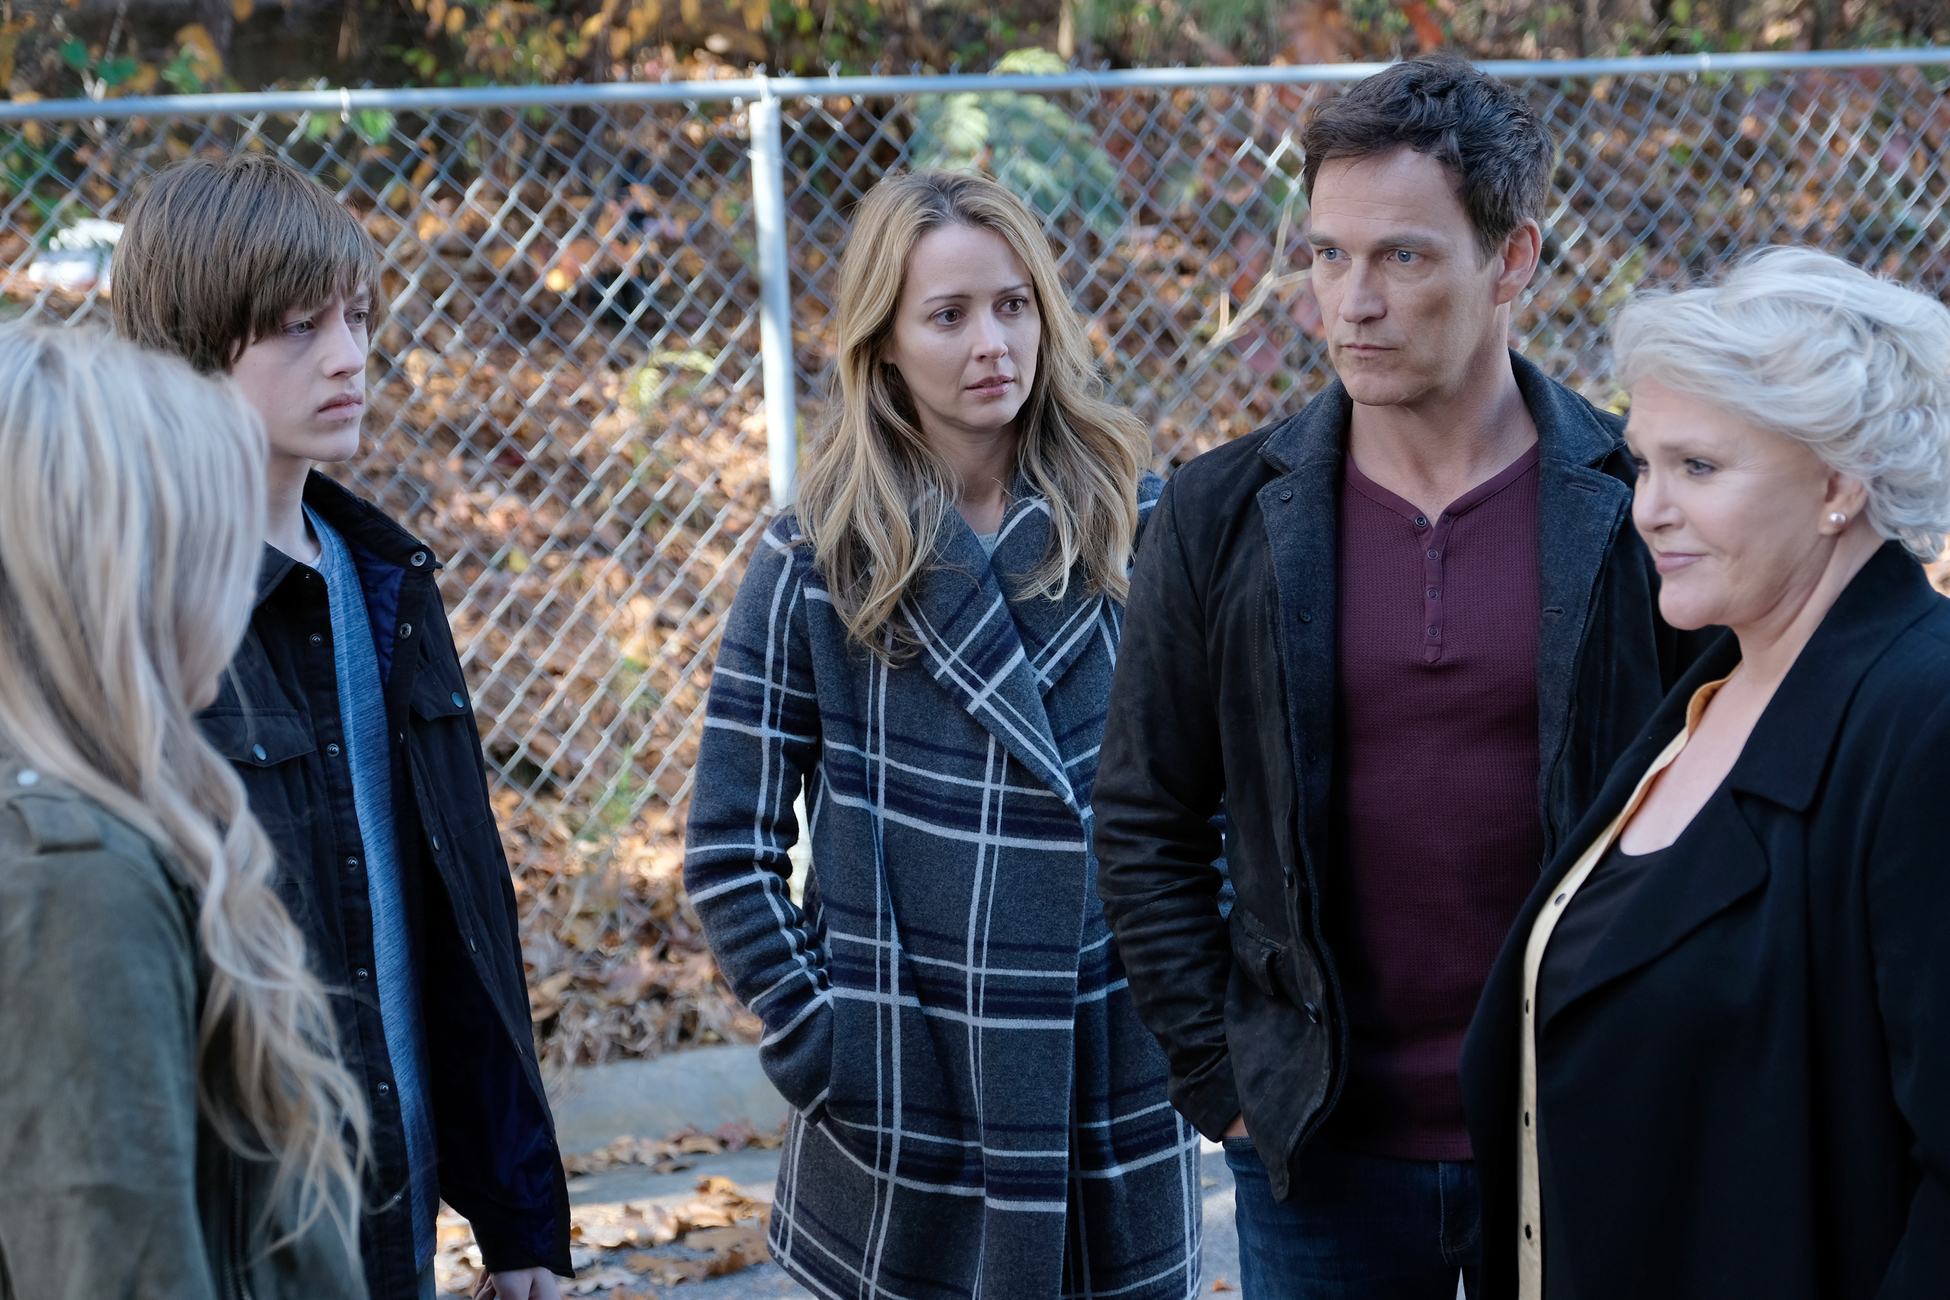 Sharon Gless, Amy Acker, Stephen Moyer, Natalie Alyn Lind, and Percy Hynes White in The Gifted (2017)